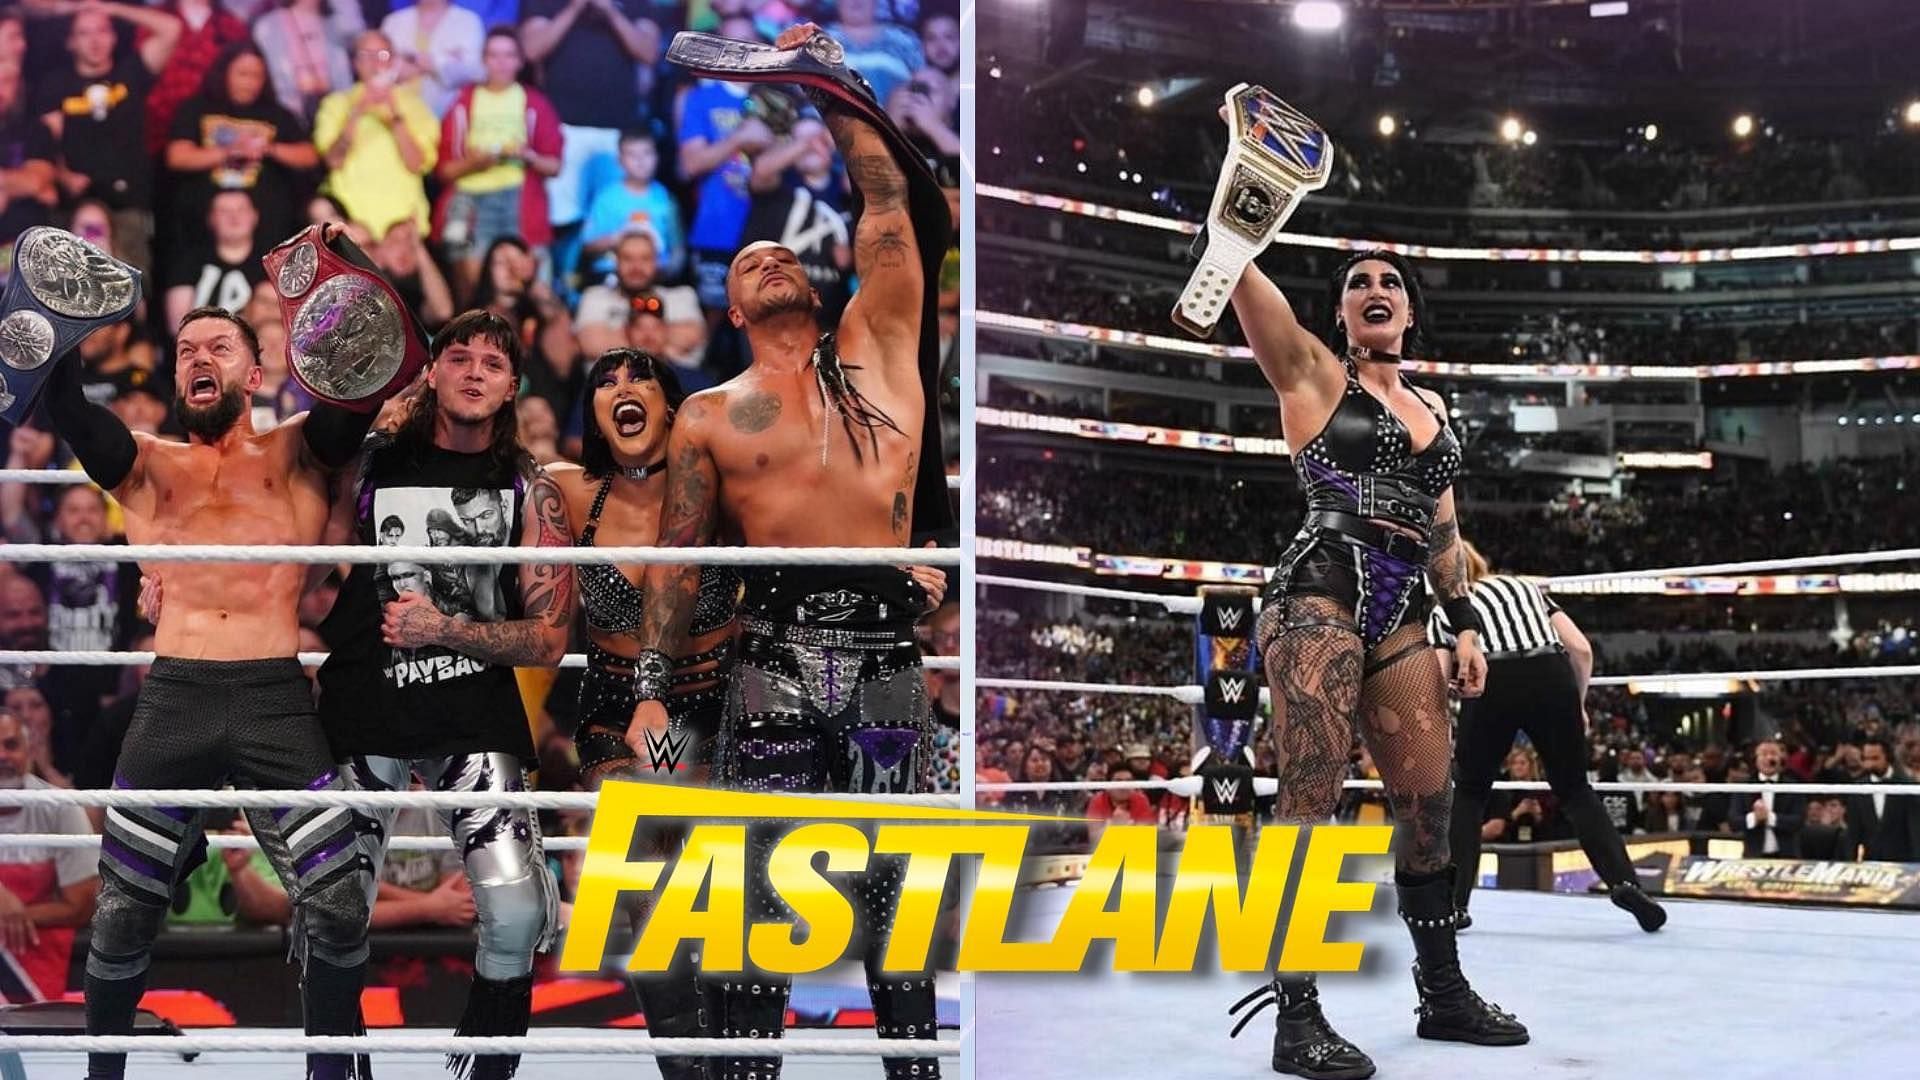 Judgment Day could have some exciting matches at WWE Fastlane 2023